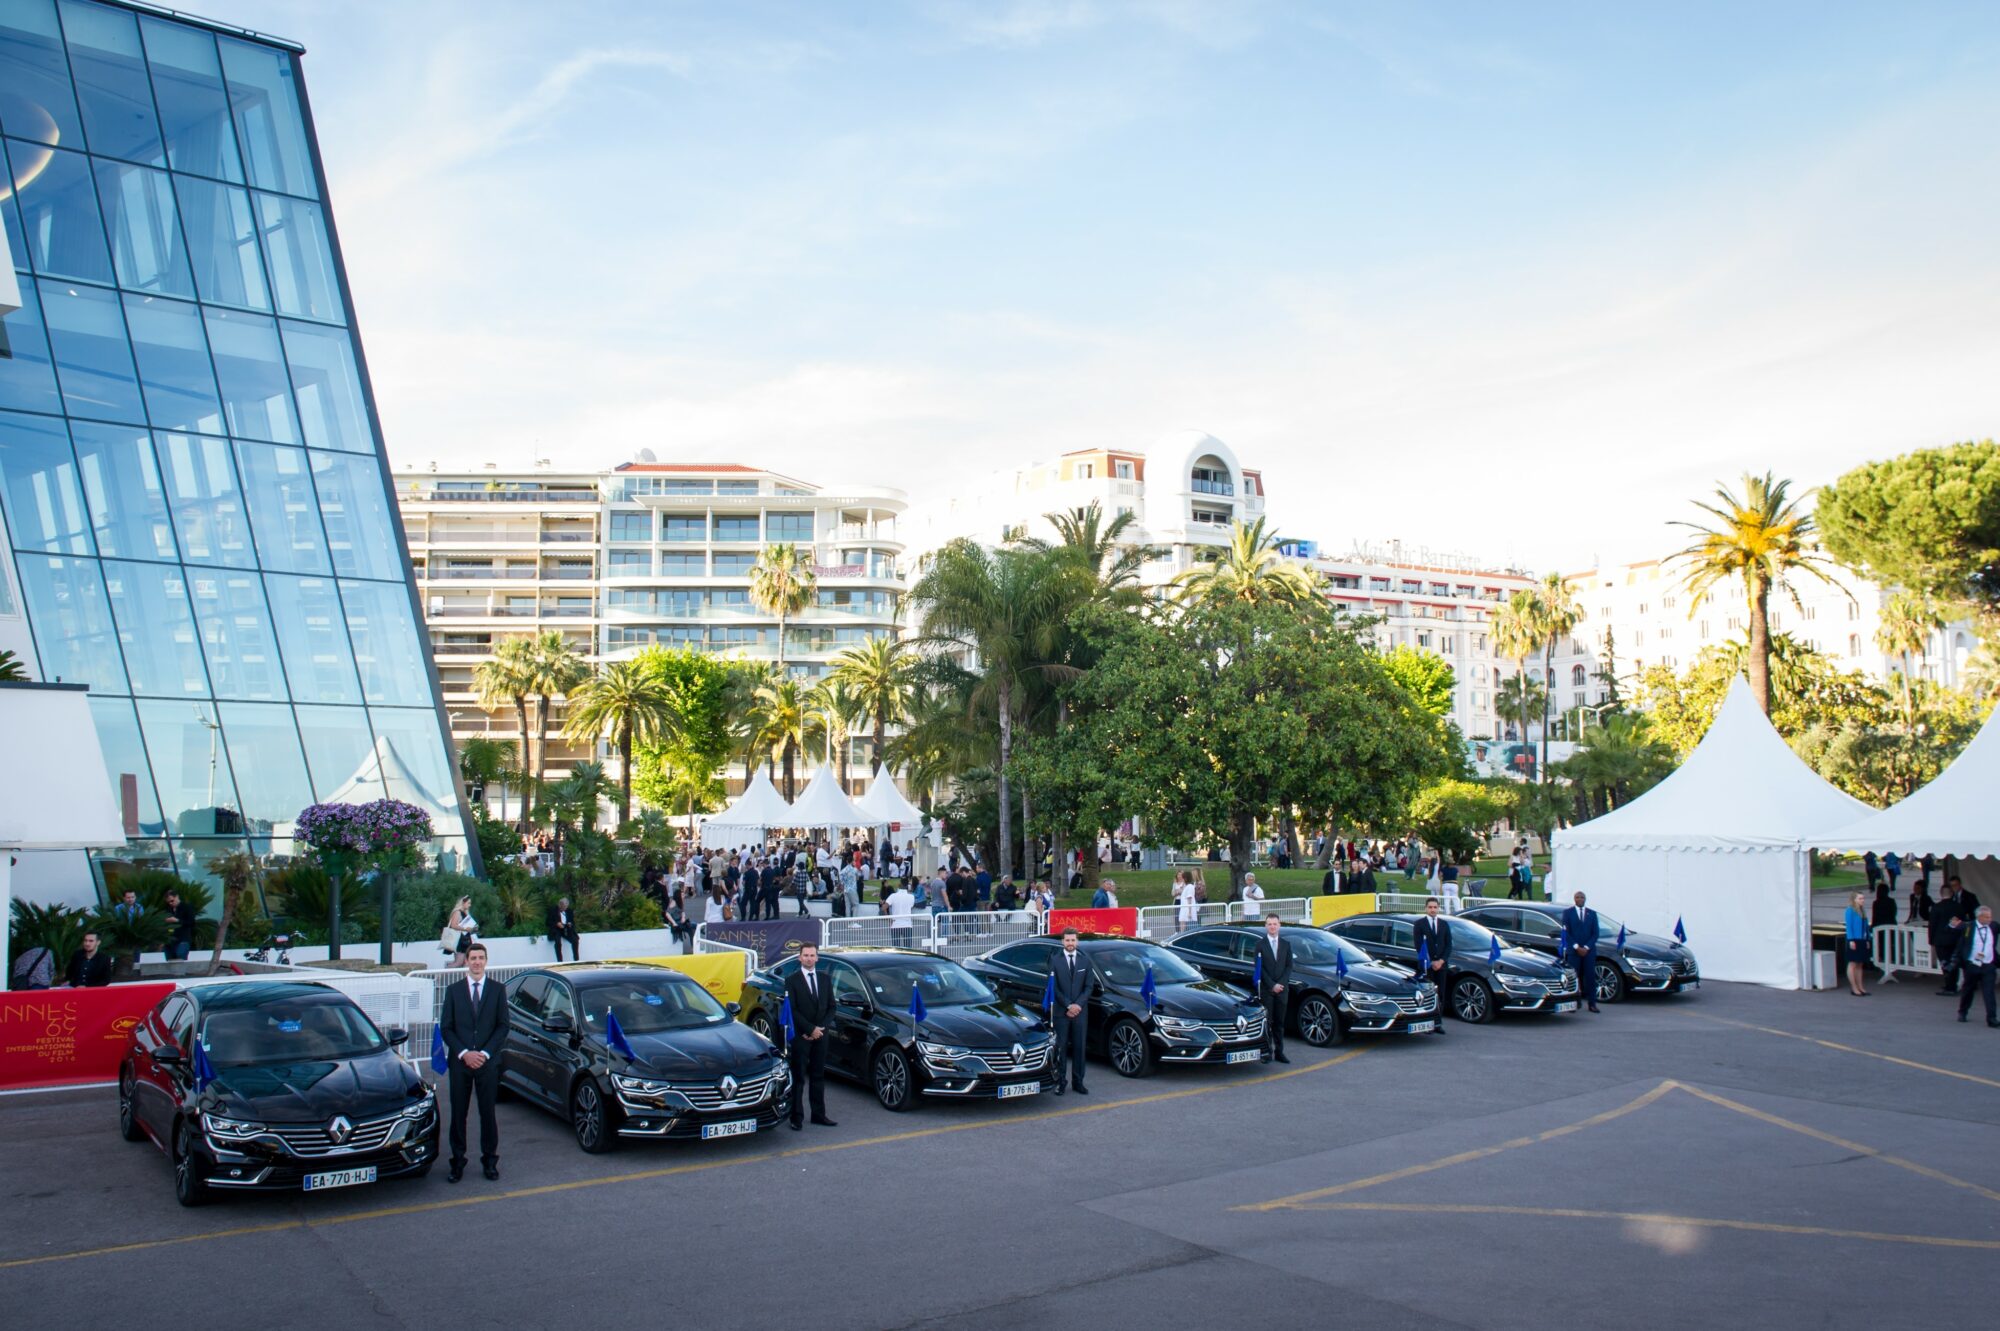 Primary Photo For: {91391, CS- RENAULT ACCOMPAGNA IL 70° FESTIVAL DI CANNES}..jpeg